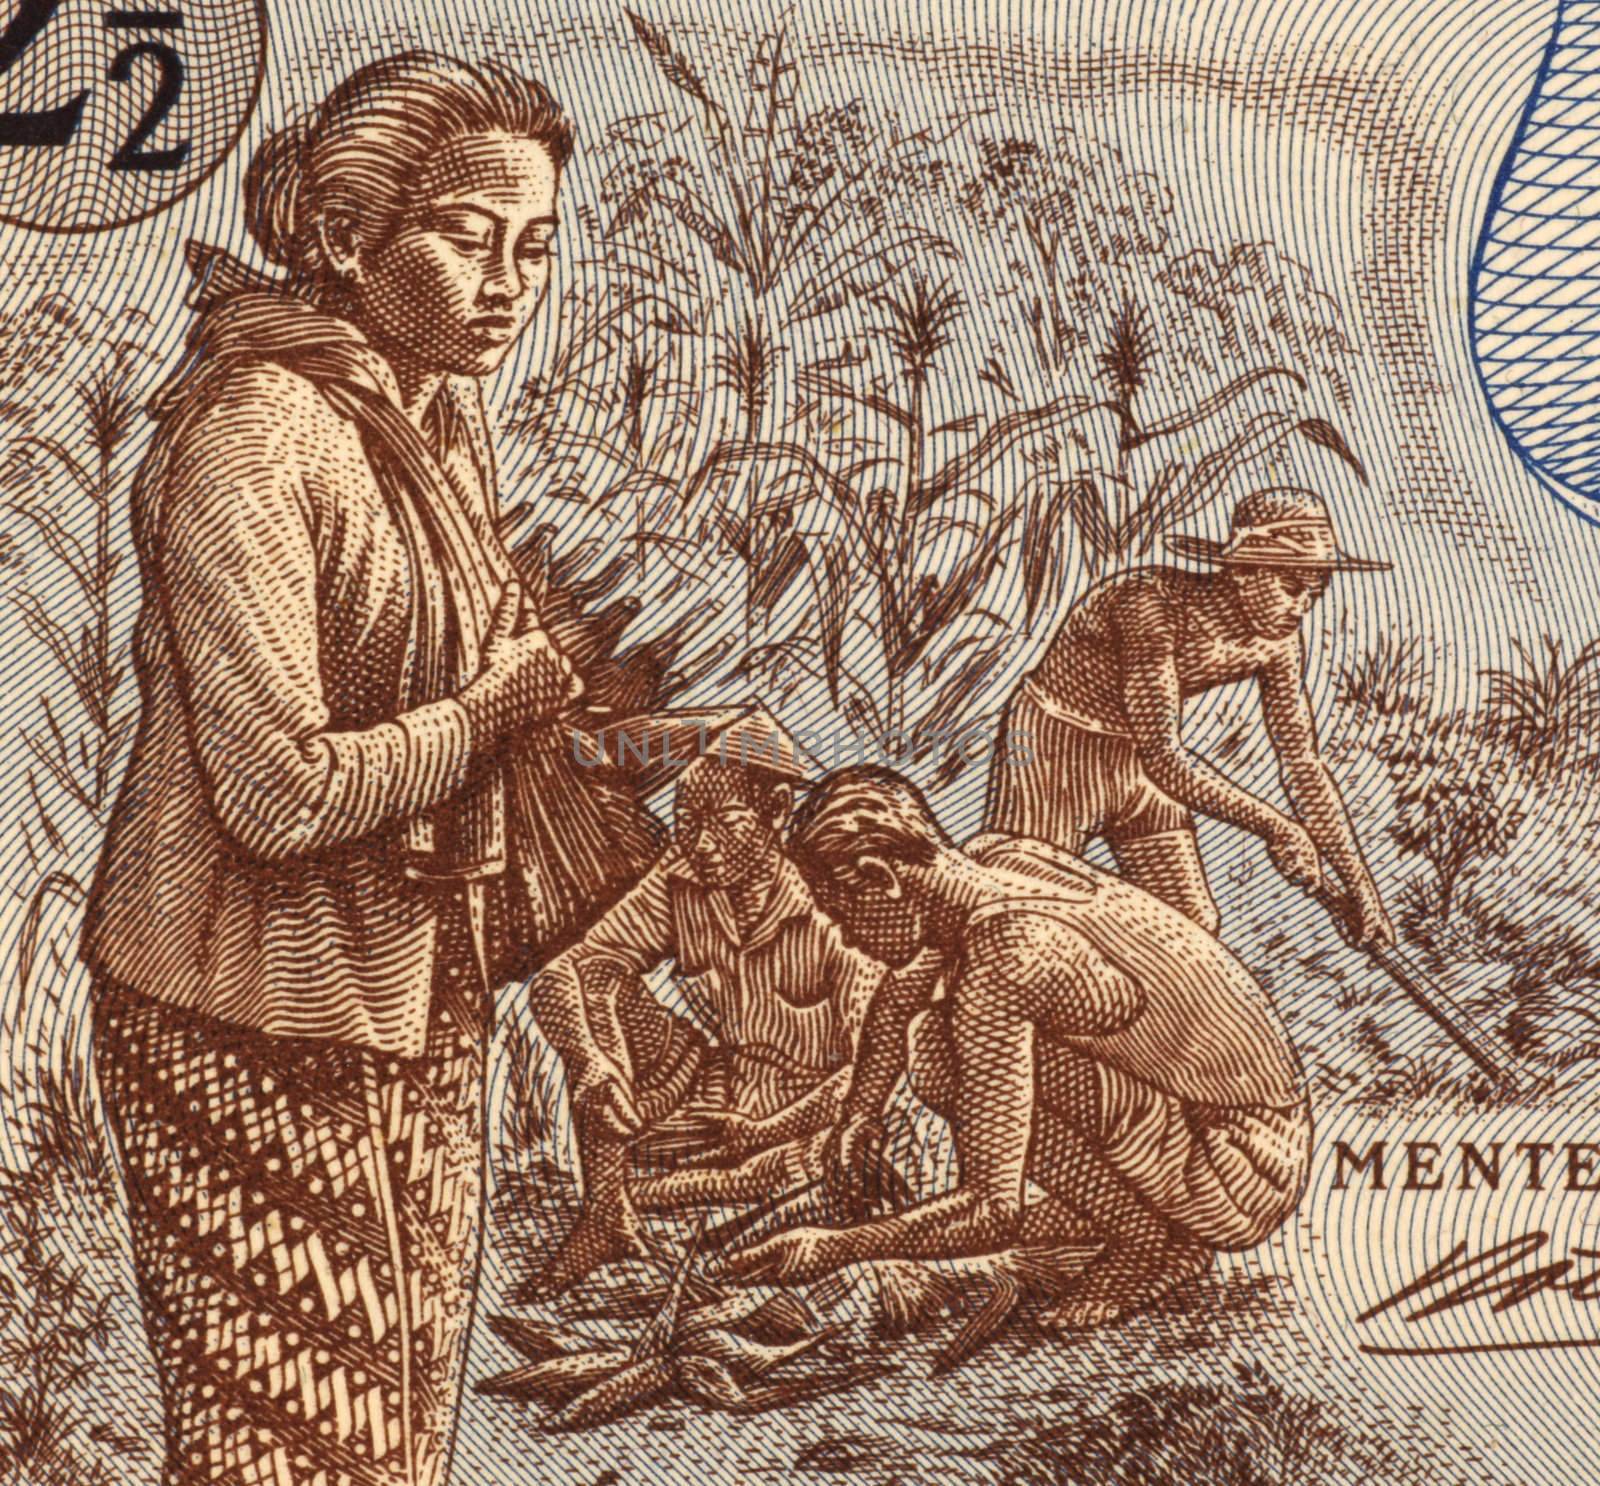 Field Workers on 2 and half Rupiah 1961 Banknote from Indonesia.